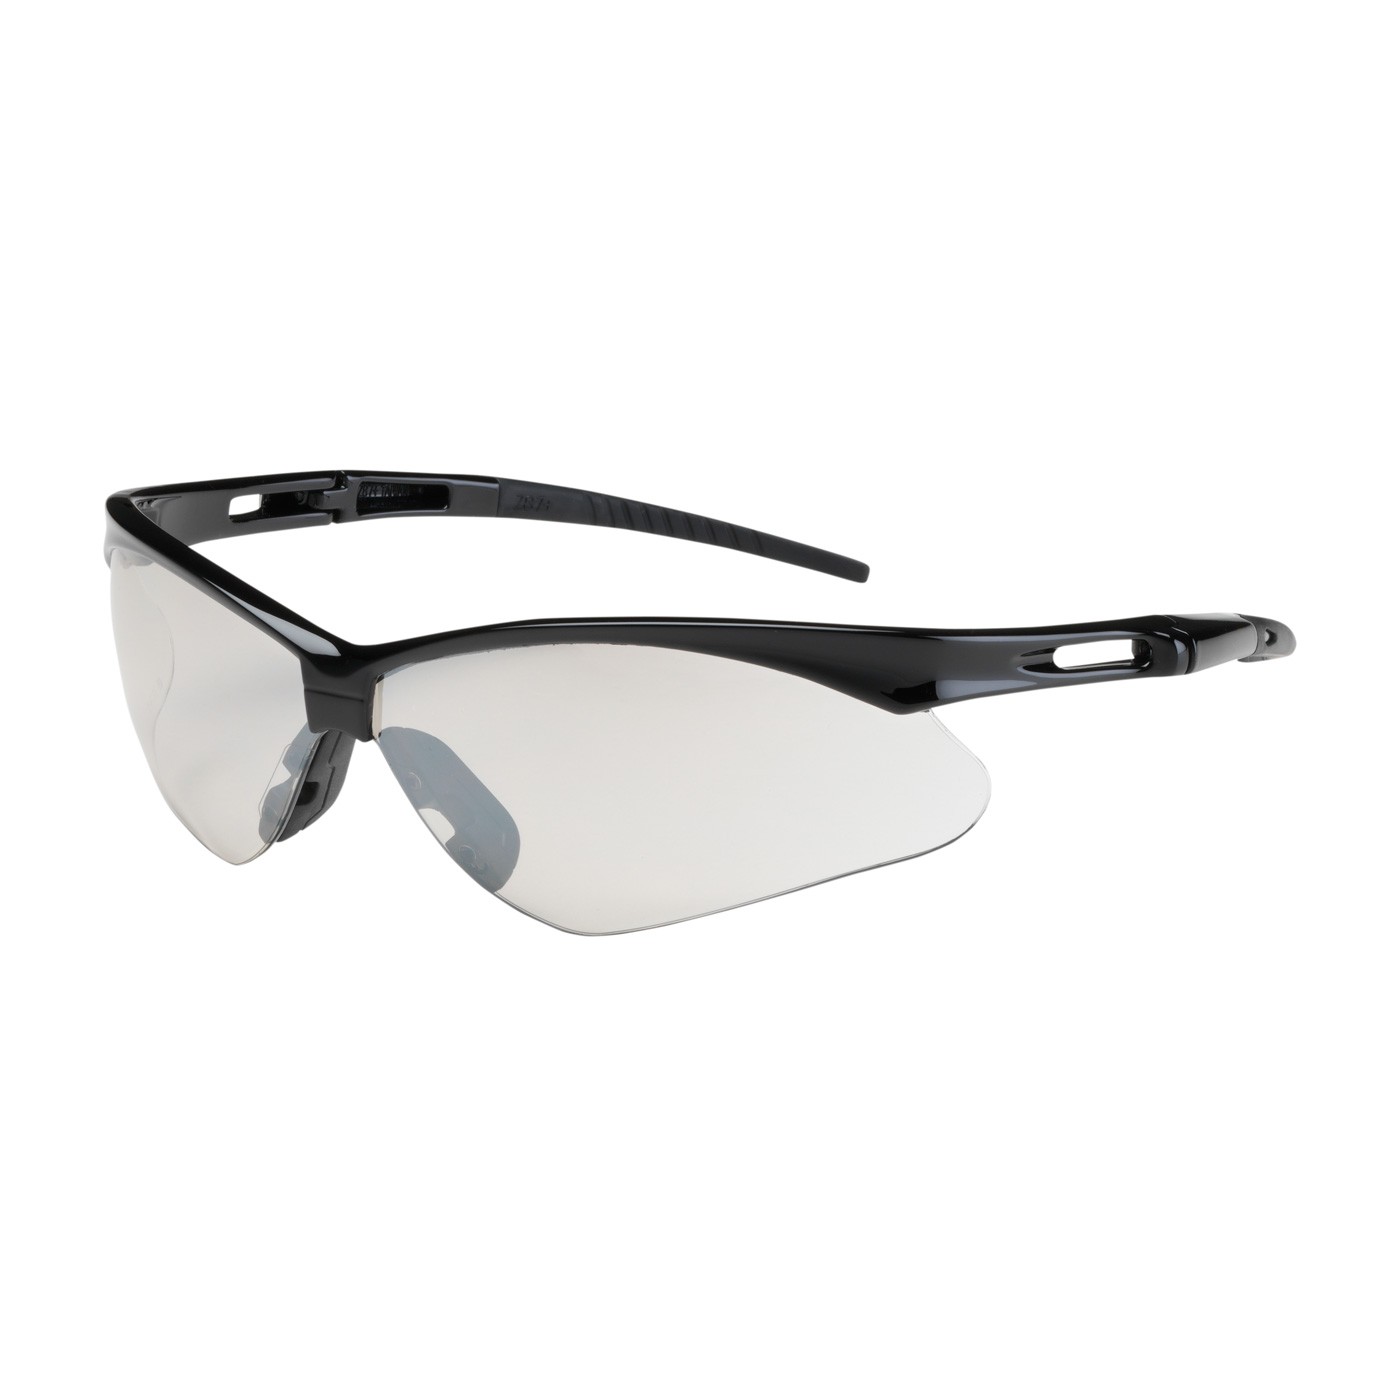 Anser™ Semi-Rimless Safety Glasses with Black Frame, I/O Lens and Anti-Scratch Coating  (#250-AN-10114)